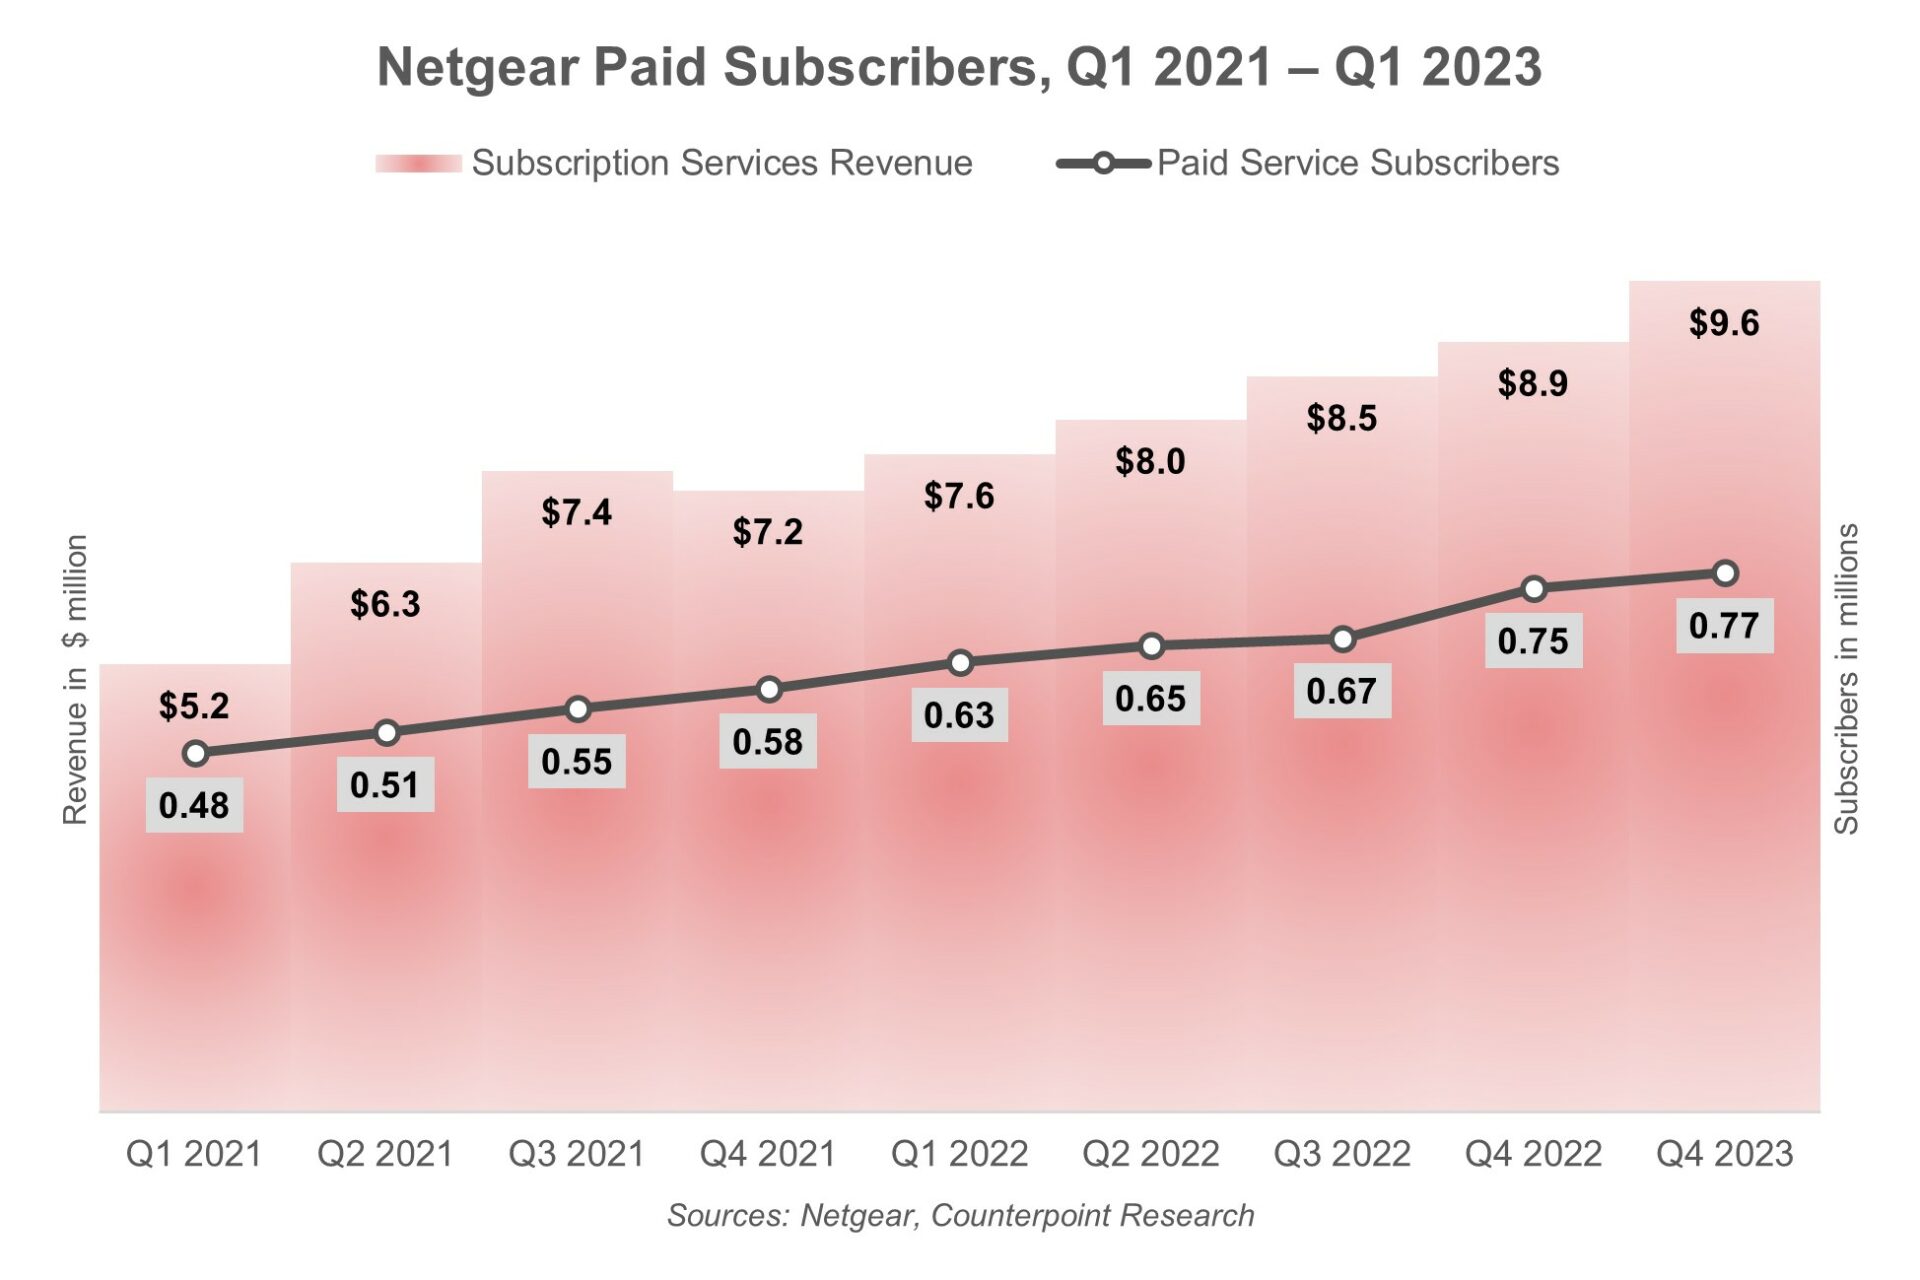 Netgear Paid Subscribers Q1 2021-Q1 2023, Counterpoint Research